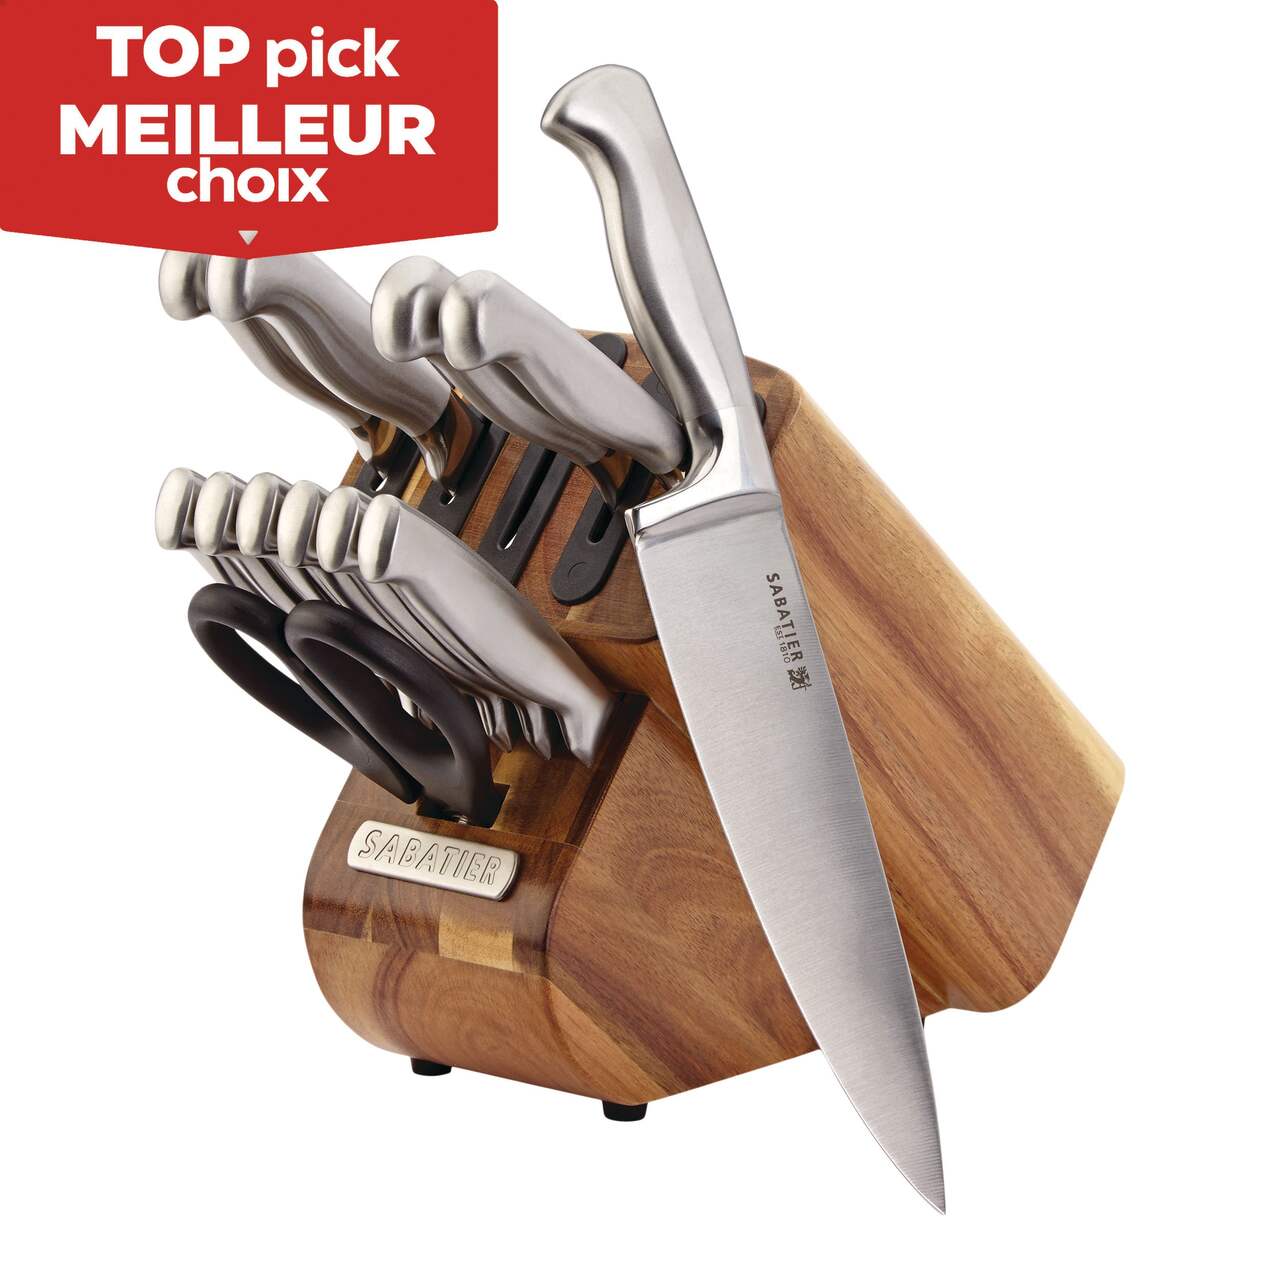 https://media-www.canadiantire.ca/product/living/kitchen/cutlery/1422622/sabatier-13-piece-acacia-wood-with-edgekeeper-cutlery-set-745622f6-ca7e-4793-b18c-4c09bf19961e-jpgrendition.jpg?imdensity=1&imwidth=640&impolicy=mZoom